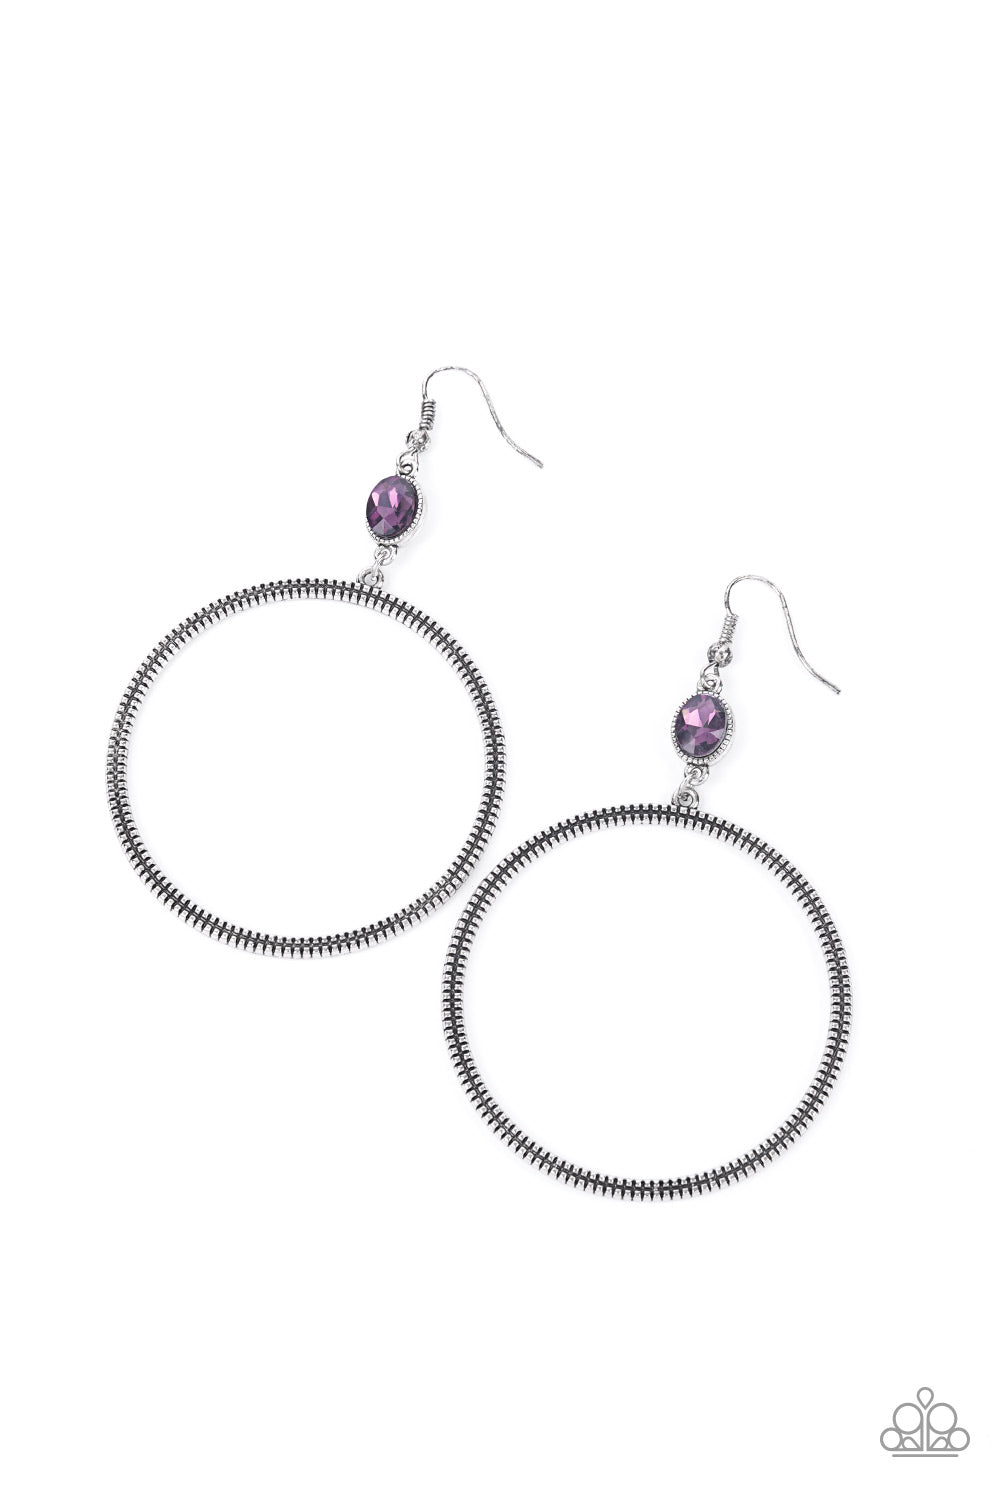 Paparazzi Work That Circuit - Purple Earrings - A Finishing Touch Jewelry